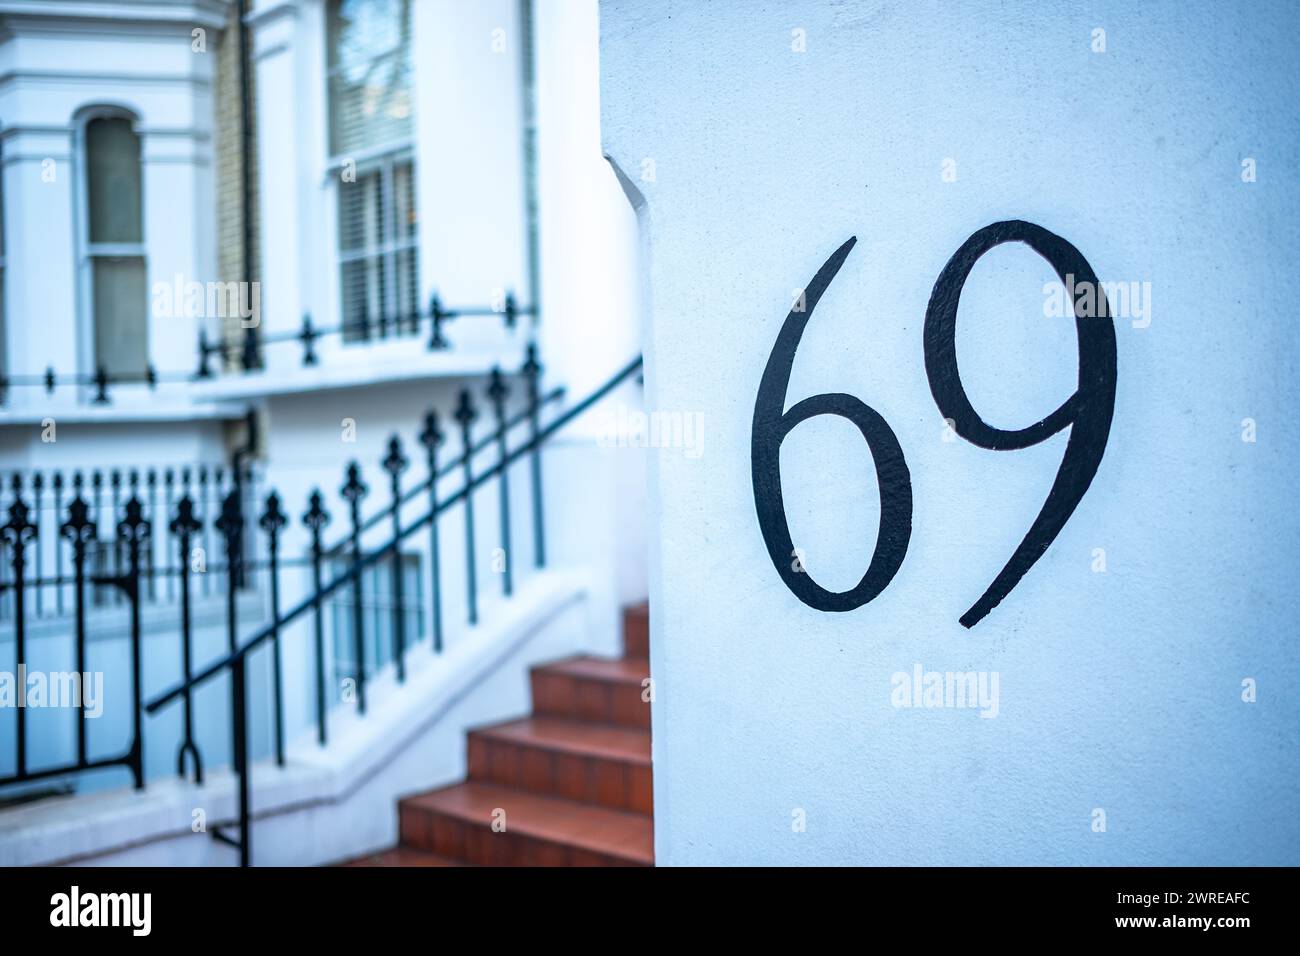 House number 69- residential building number Stock Photo